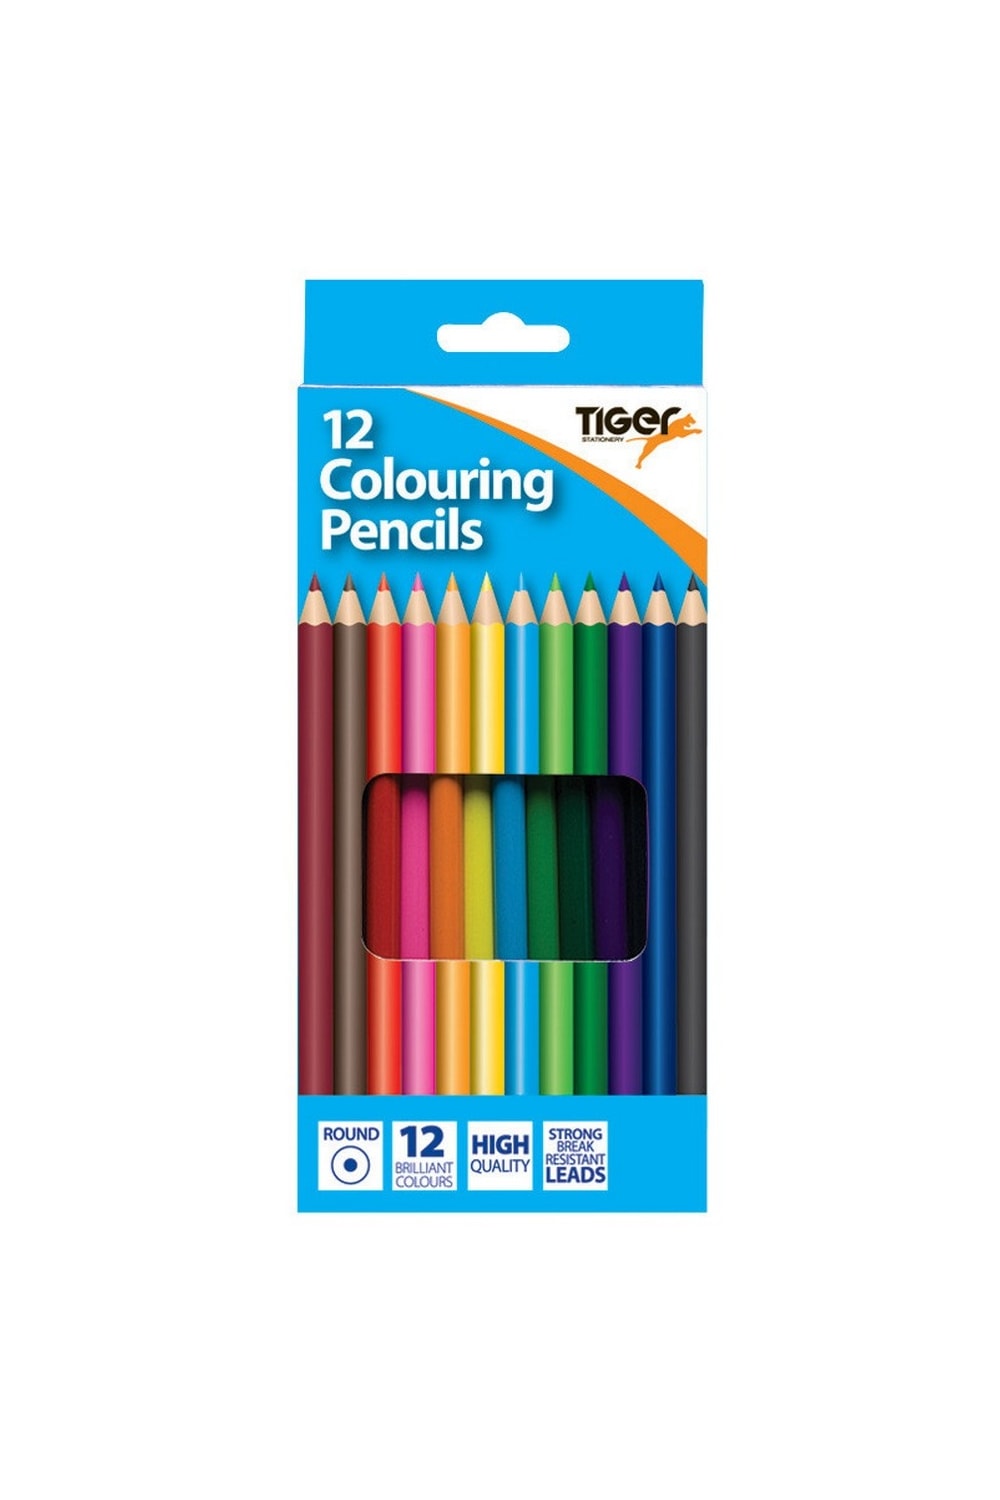 Tiger Stationery Full Length Coloured Pencil (Pack of 12) (Multicolored) (One Size)